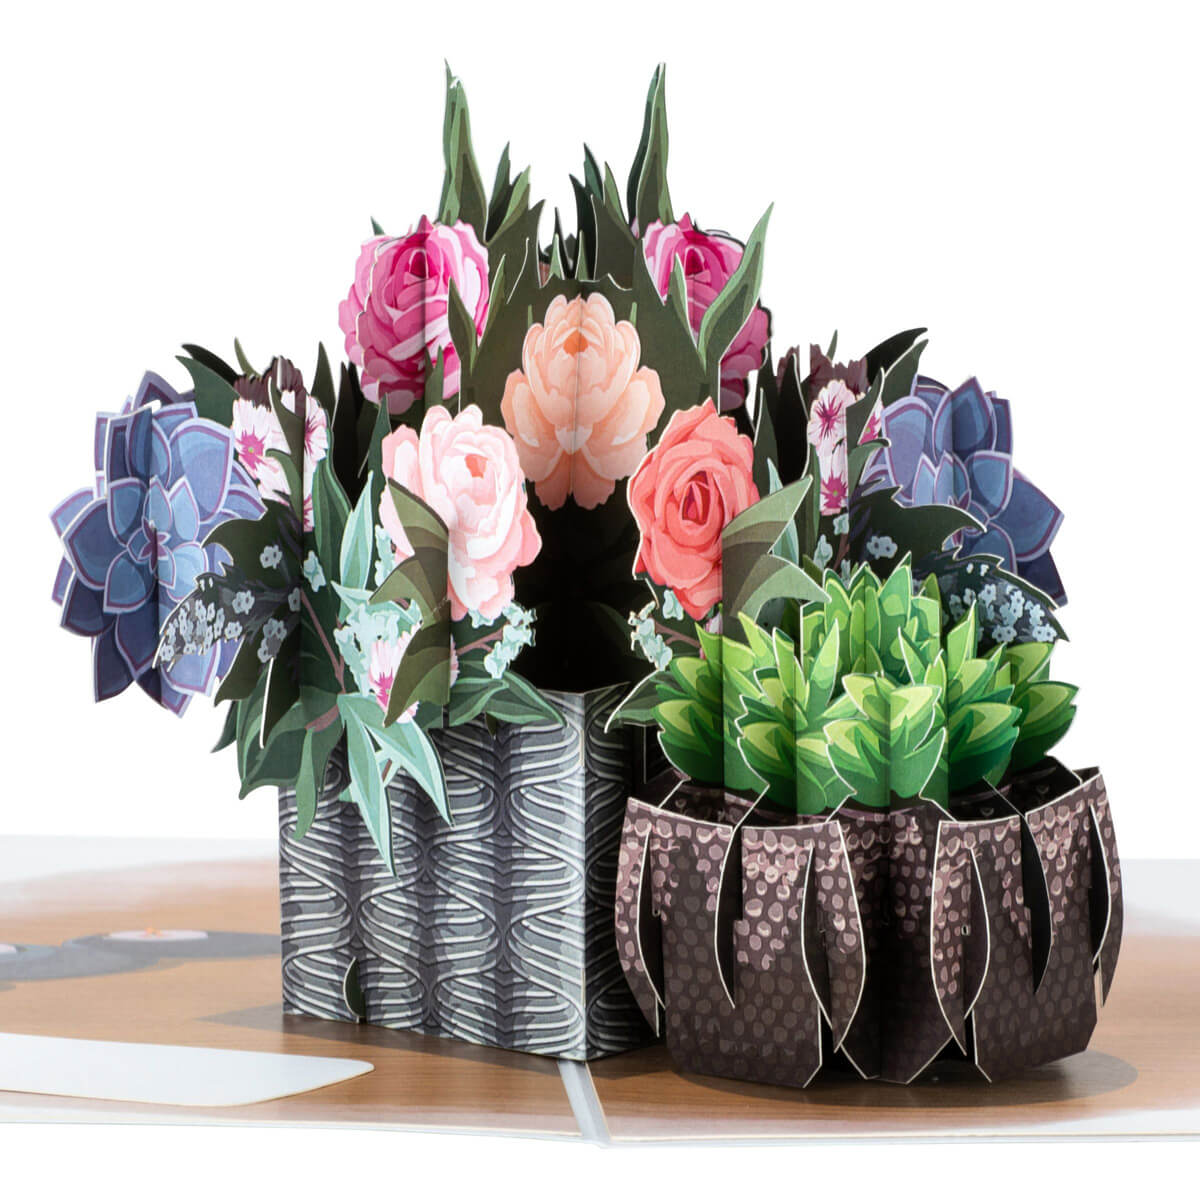 Peonies Pop Up Card by Cardology - Image shows close up of the card which shows a pop up table arrangement of beautiful peonies and a succulent in 3D form. 